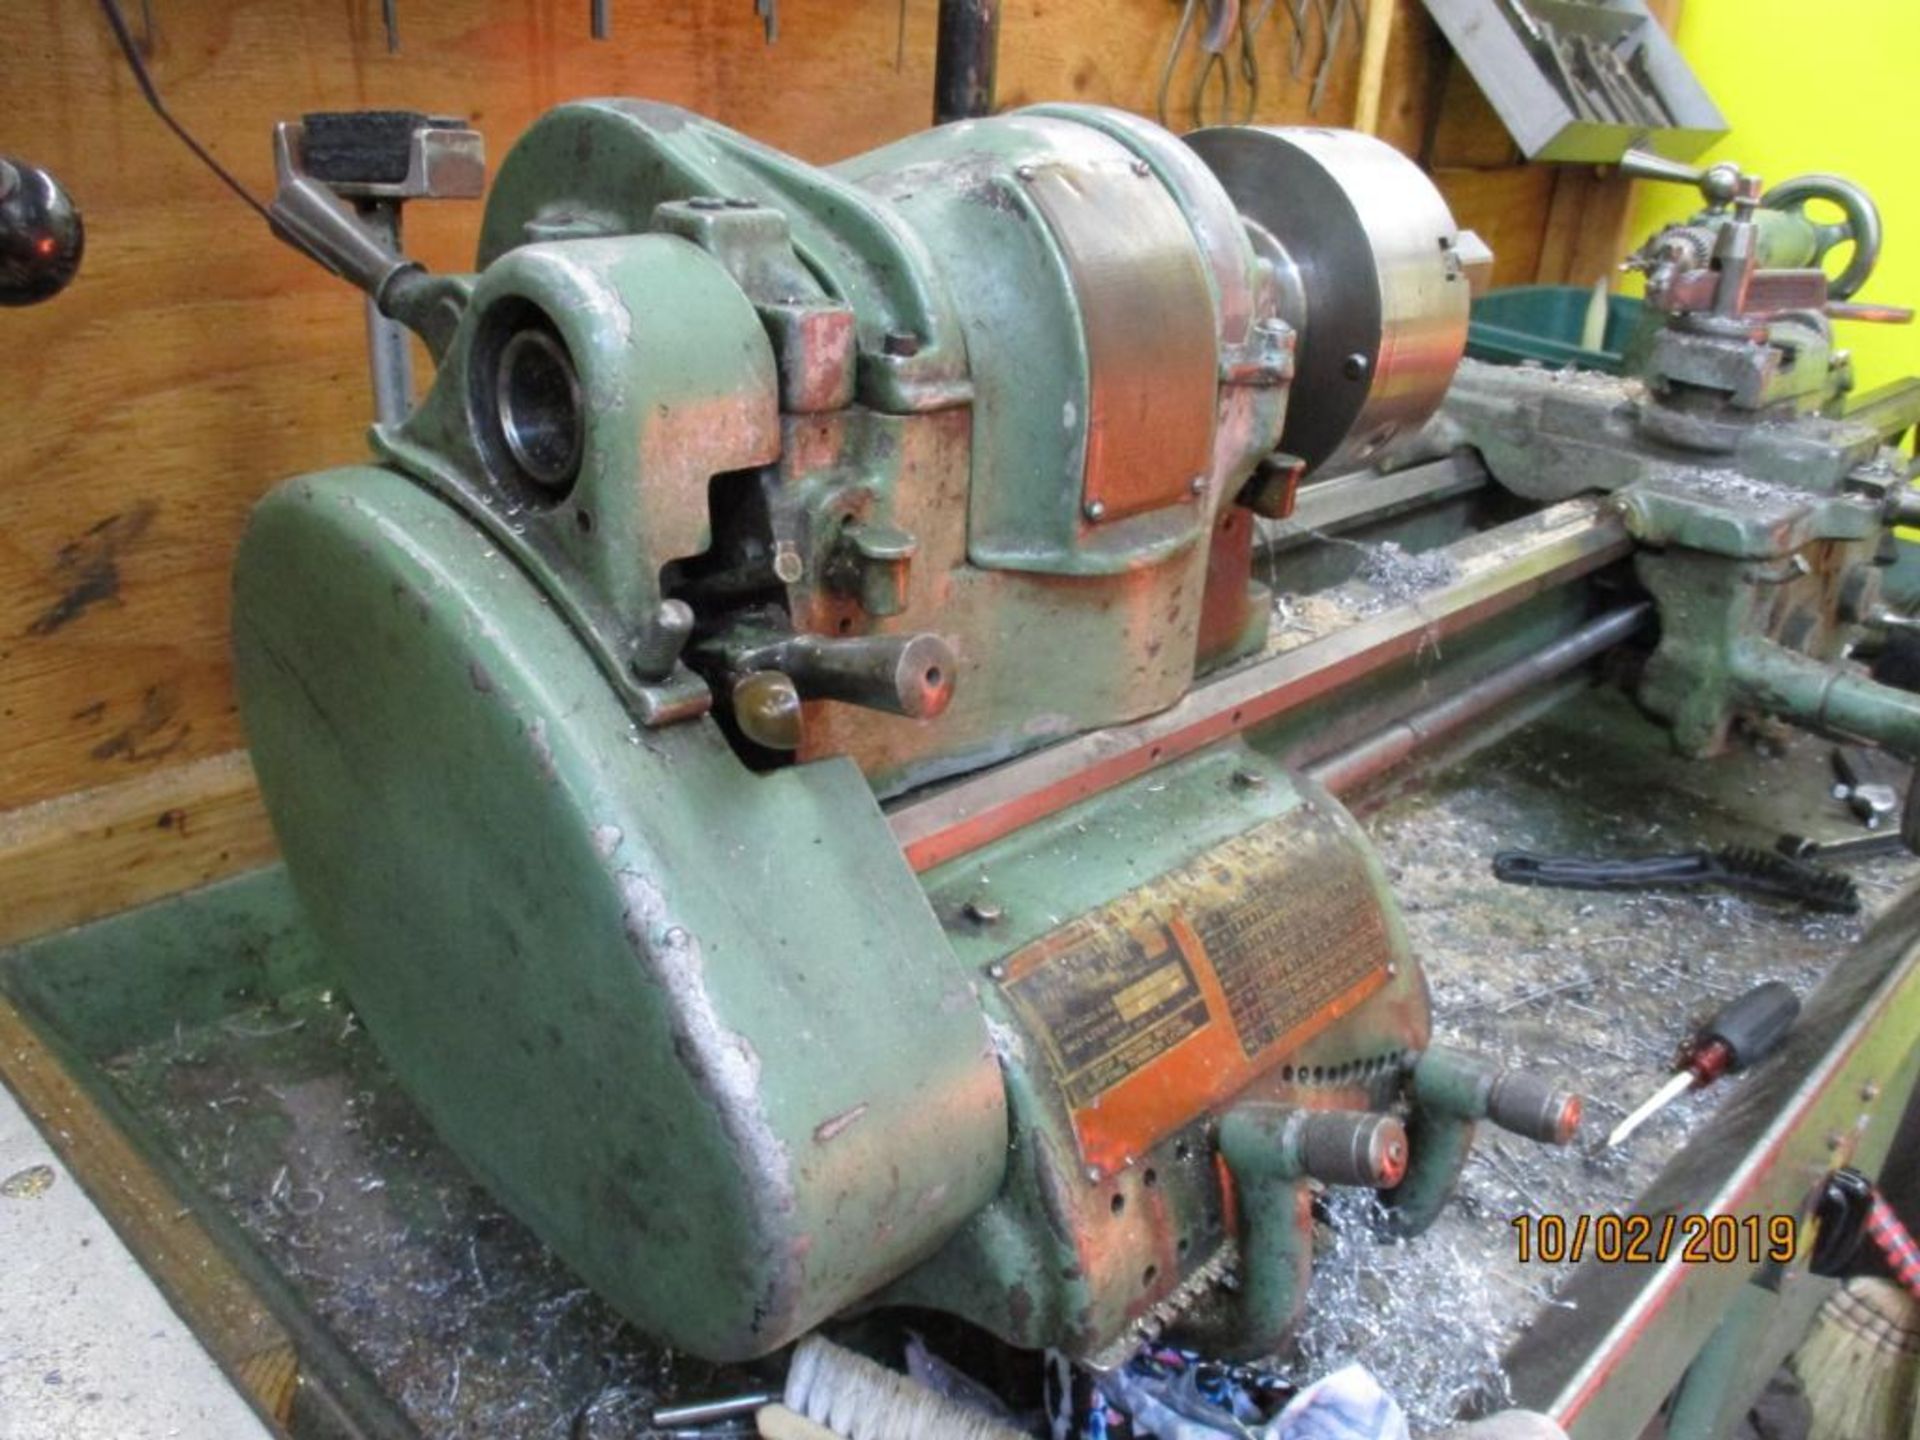 Southbend 10"x4' (est) Cat. No. CL187RB Engine Lathe S/N: 1041RKL14X, 4.5' Bed, 6" Three Jaw Chuck, - Image 4 of 6